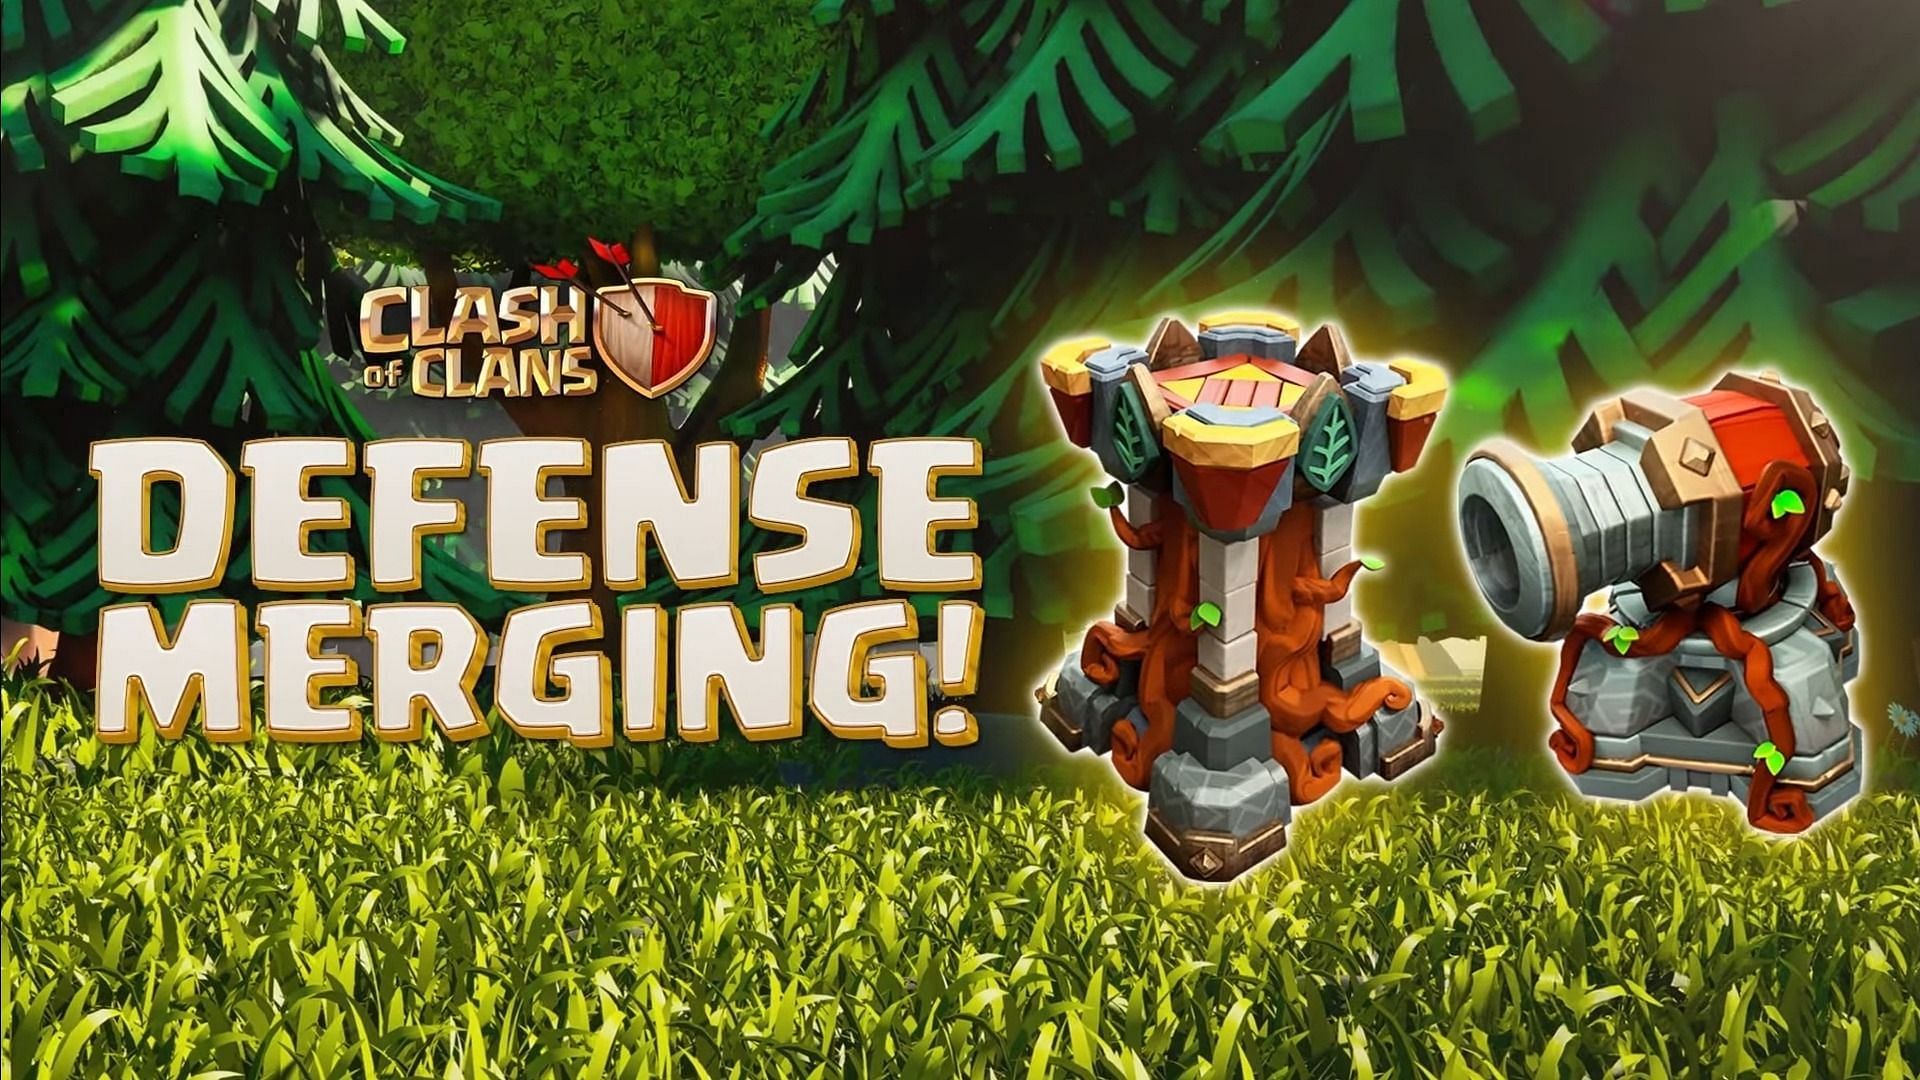 Building merging feature (Image via Supercell)